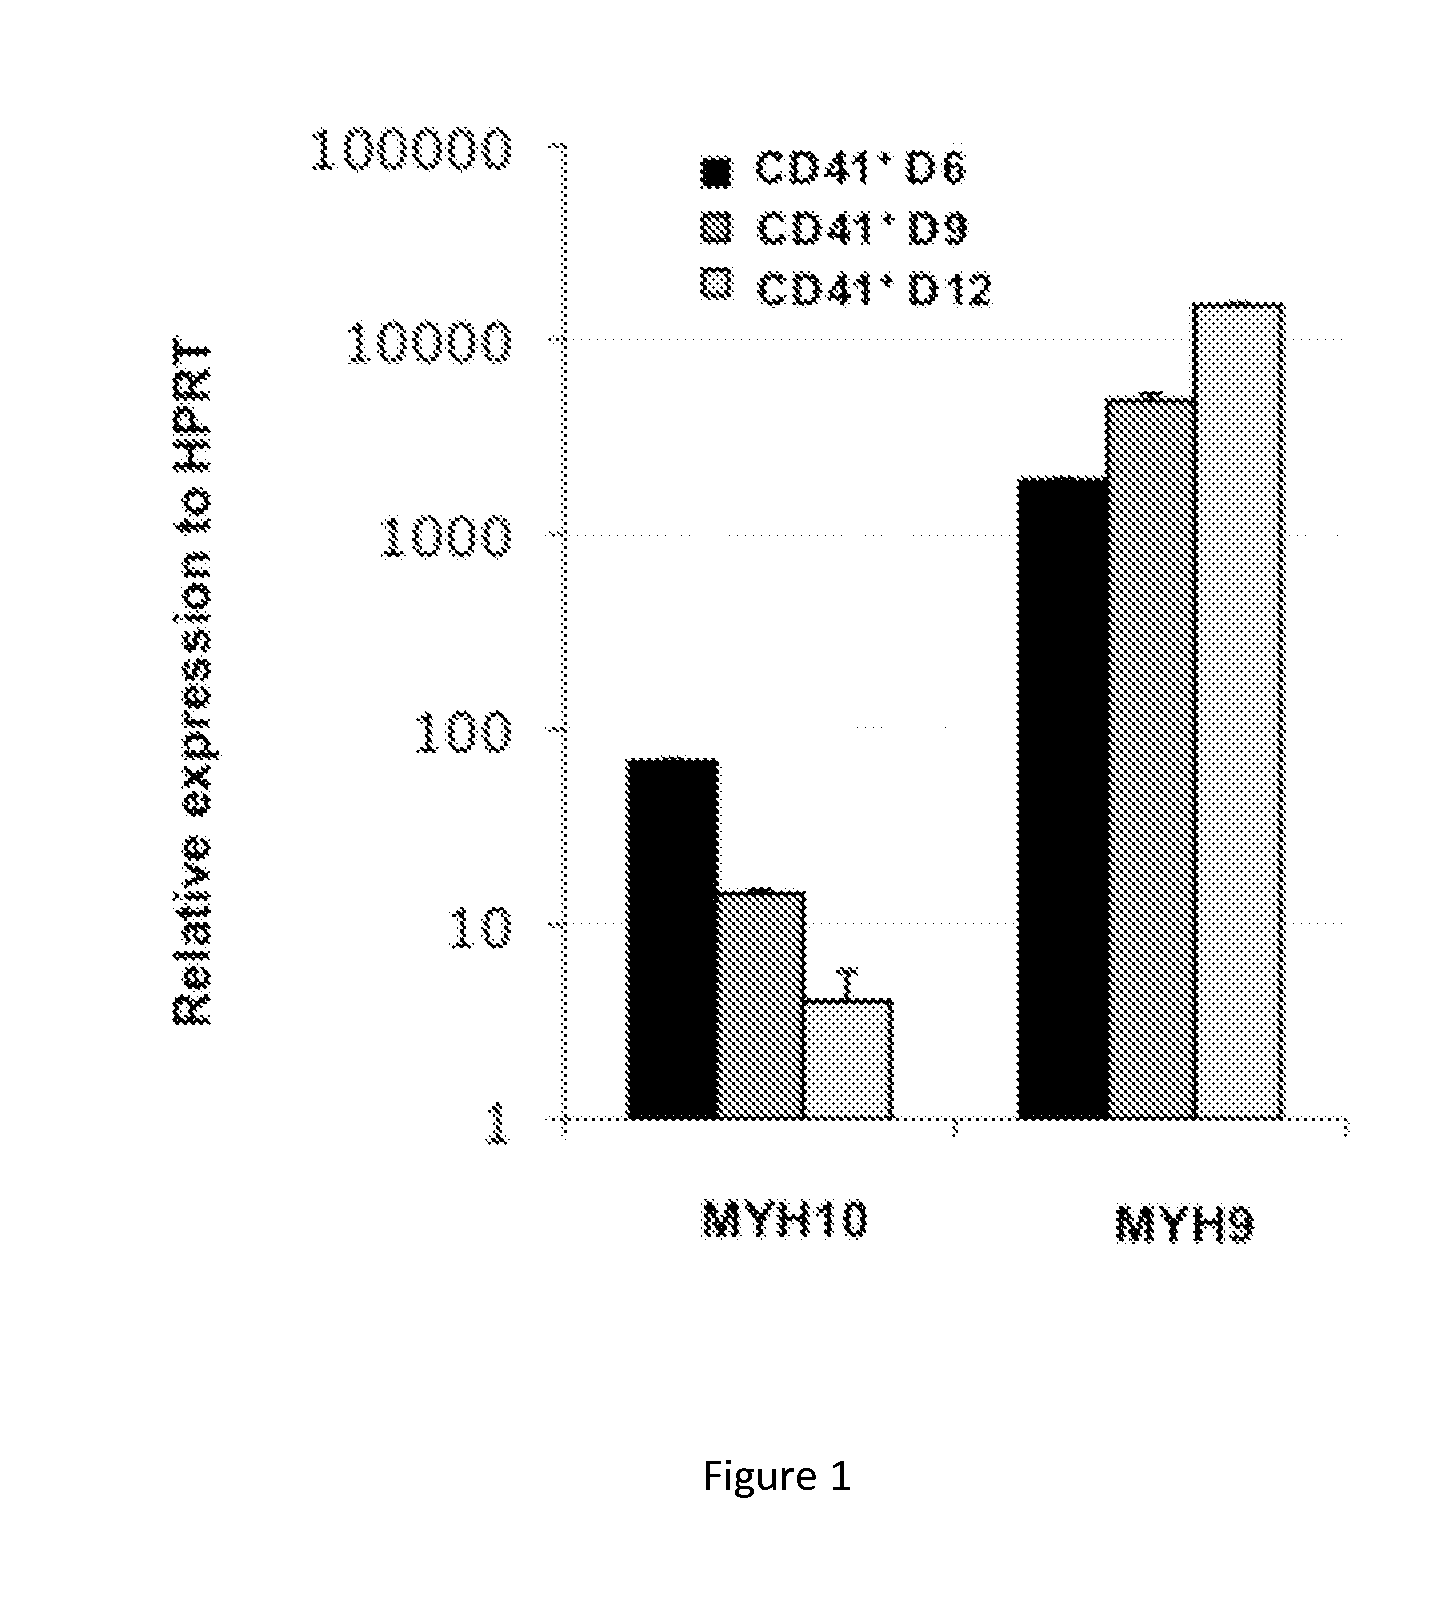 Myh10 as a new marker of pathologies resulting from runx1 inactivation